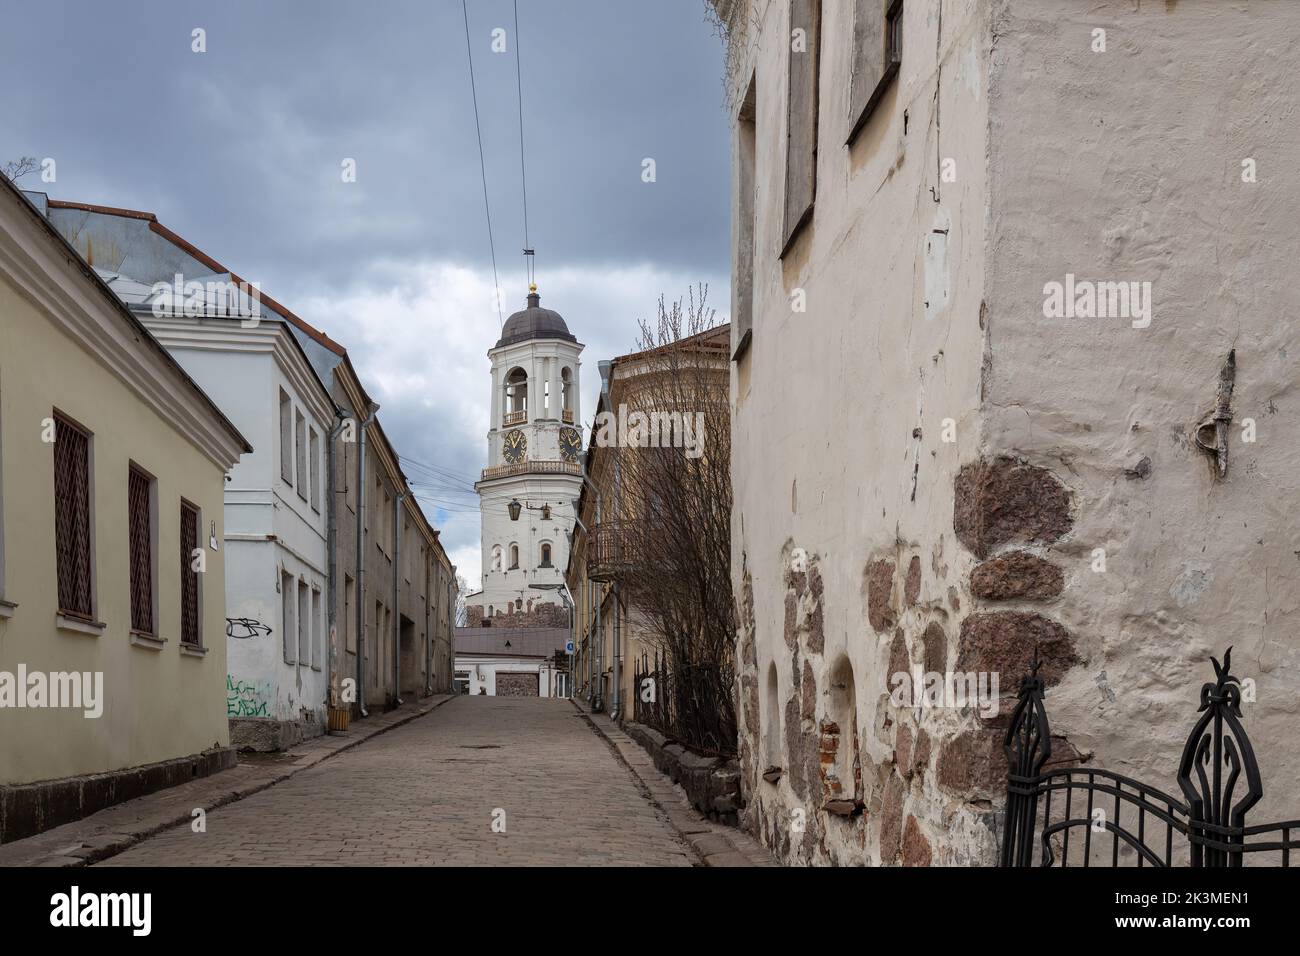 clock tower in the city of Vyborg, the bell tower of the destroyed cathedral, April 11, 2022, Vyborg, Russia Stock Photo